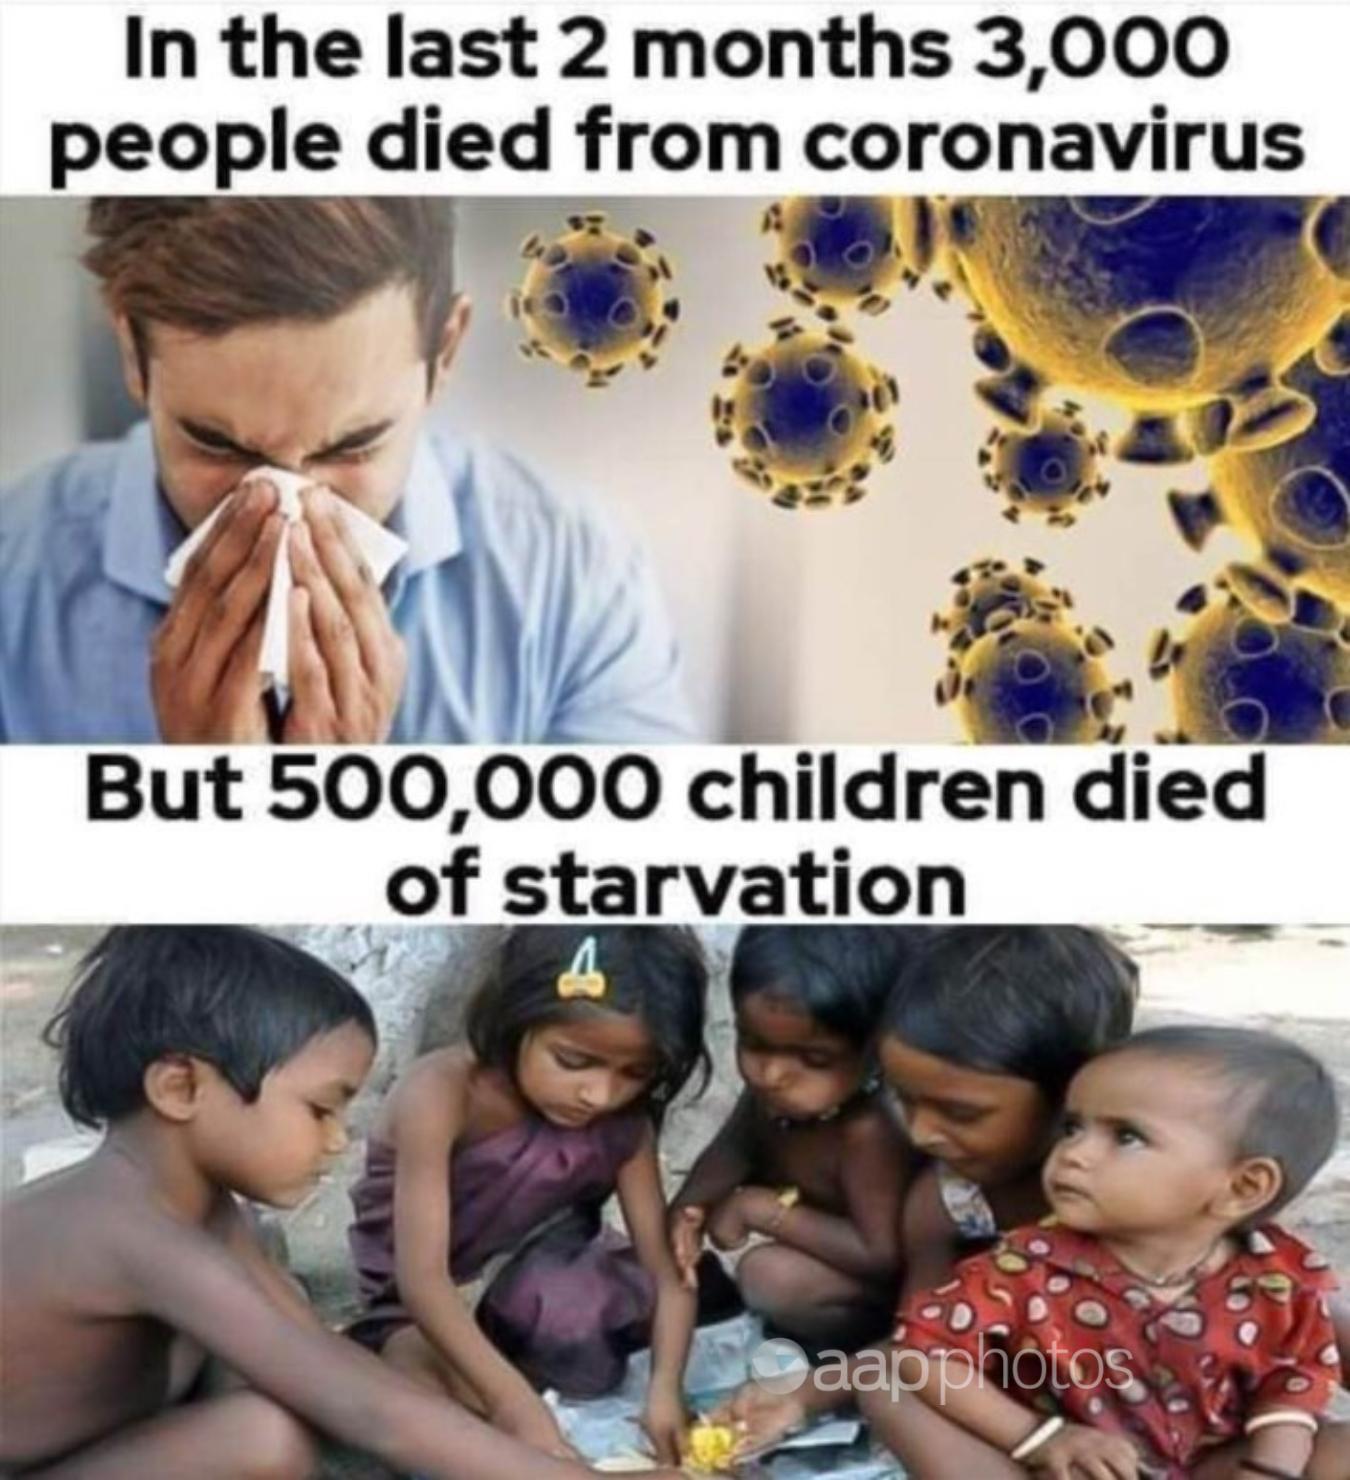 A meme comparing COVID-19 mortality to child starvation deaths.